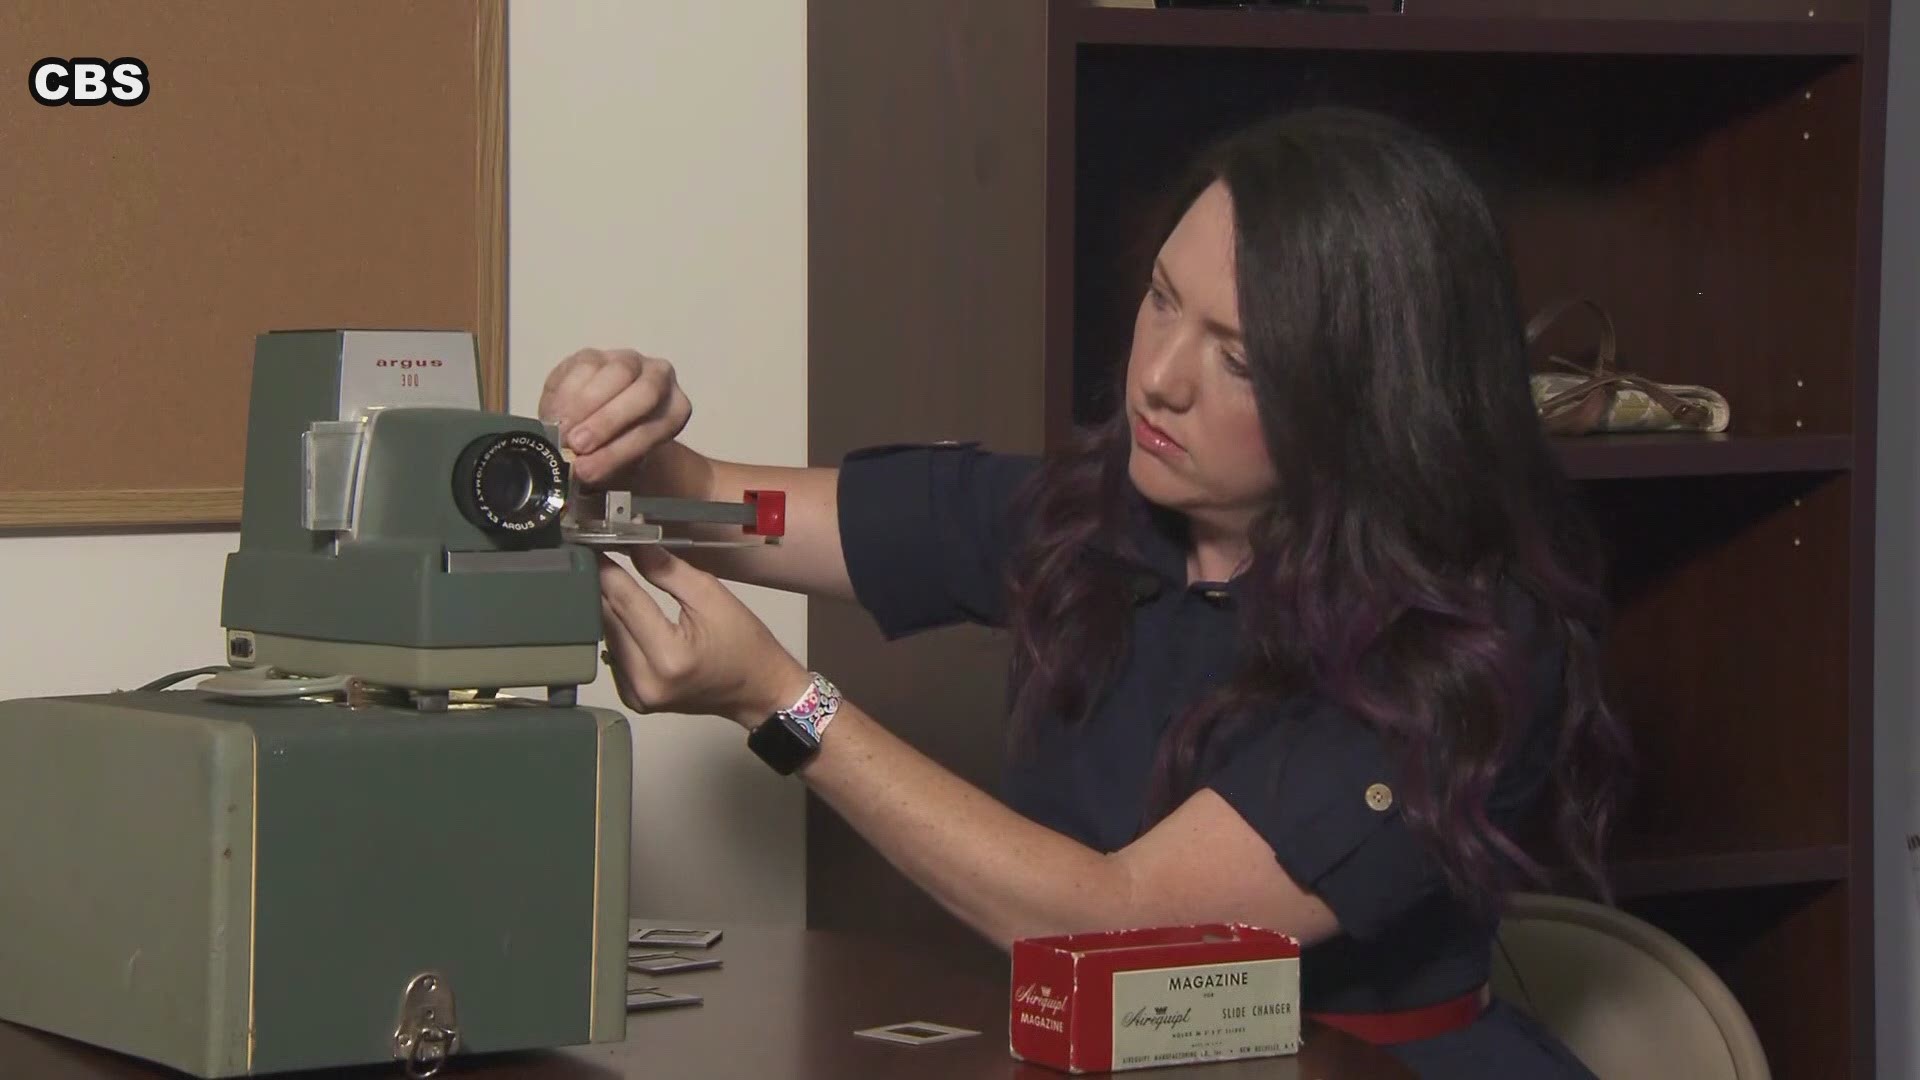 Woman finds decades-old family photos after buying an old projector at a Goodwill store in Georgia, Now this woman is searching to try and find the family.